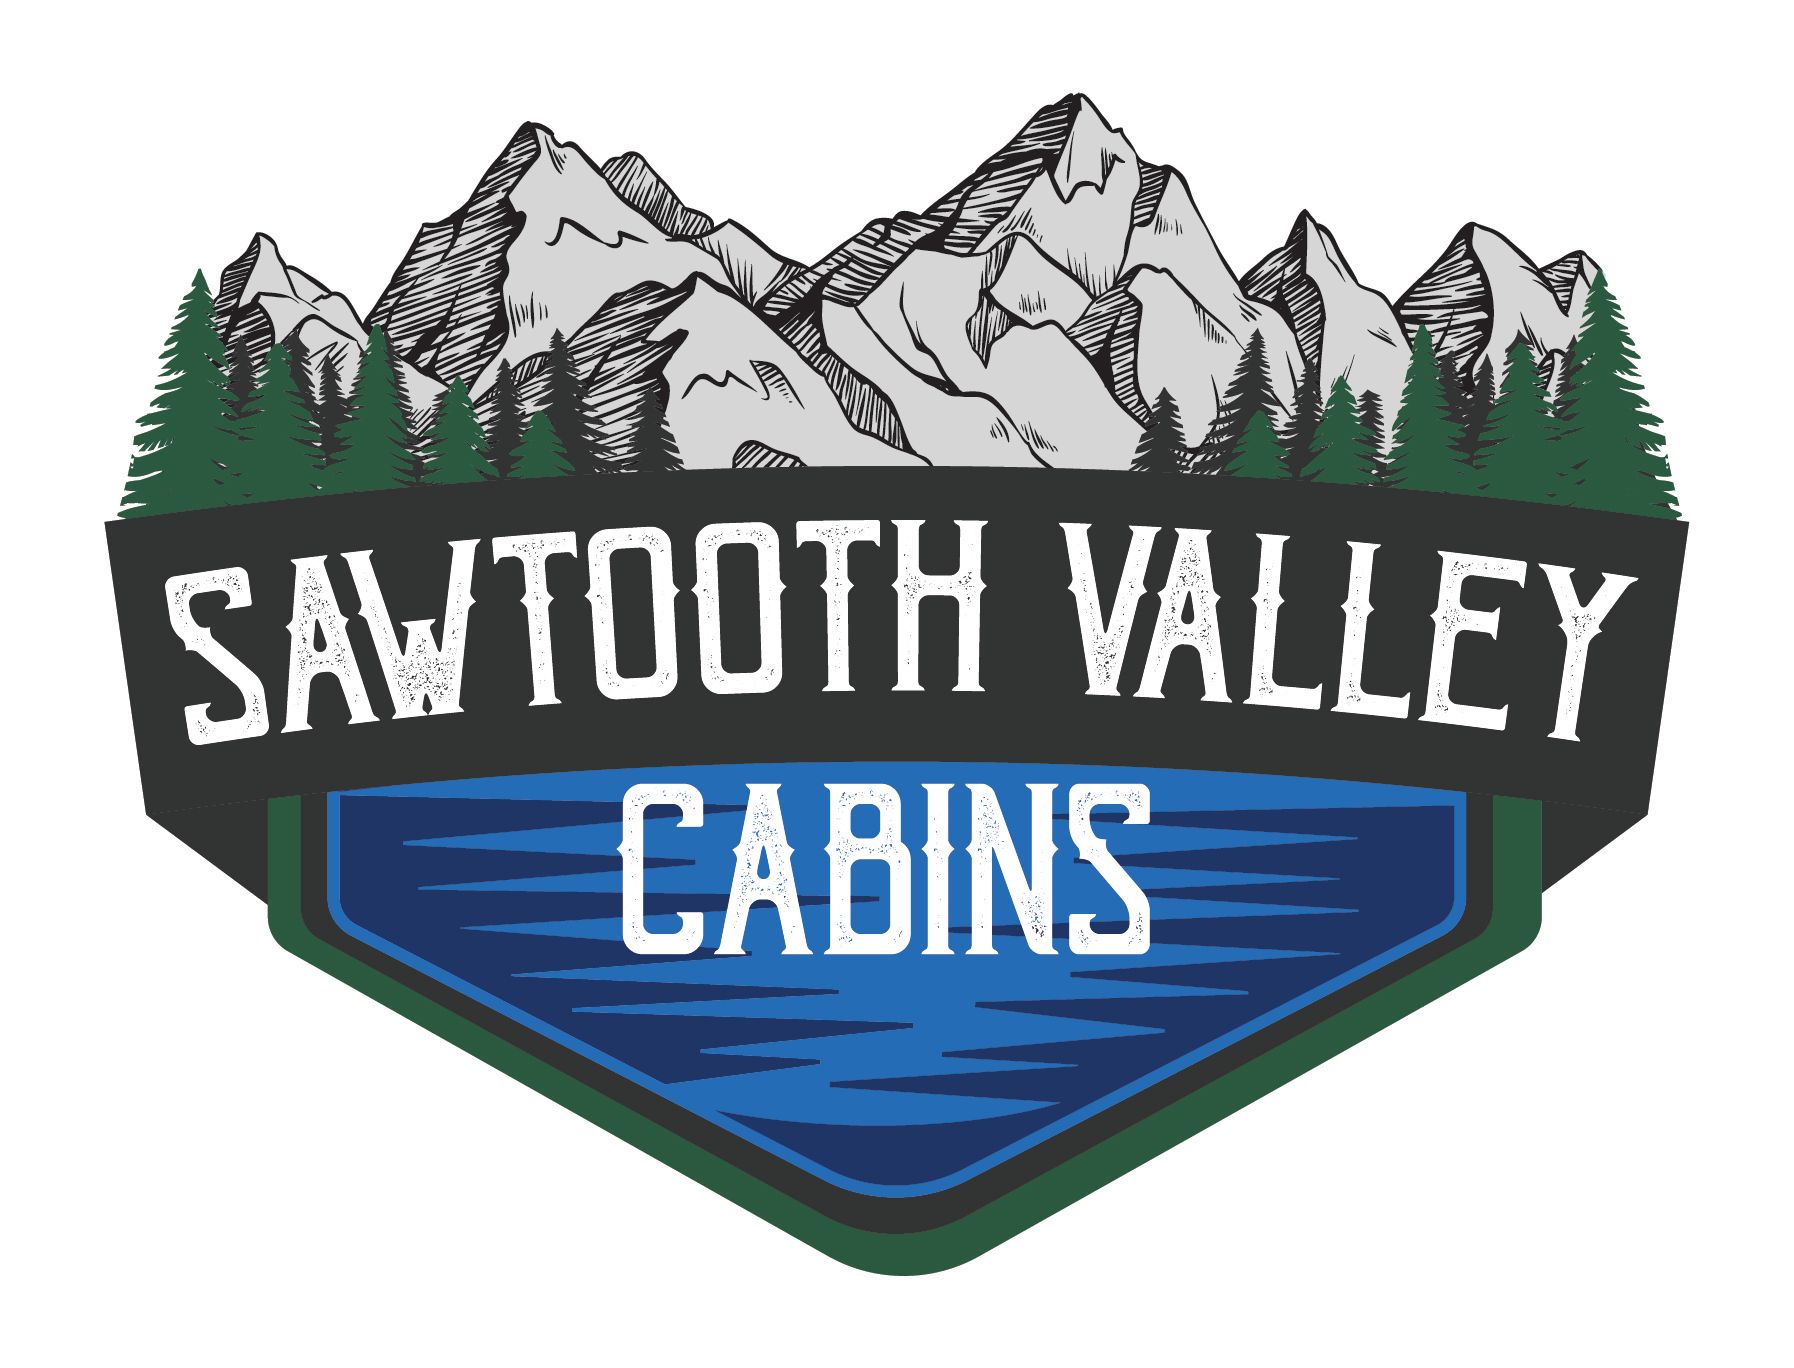 Sawtooth Valley Cabins 